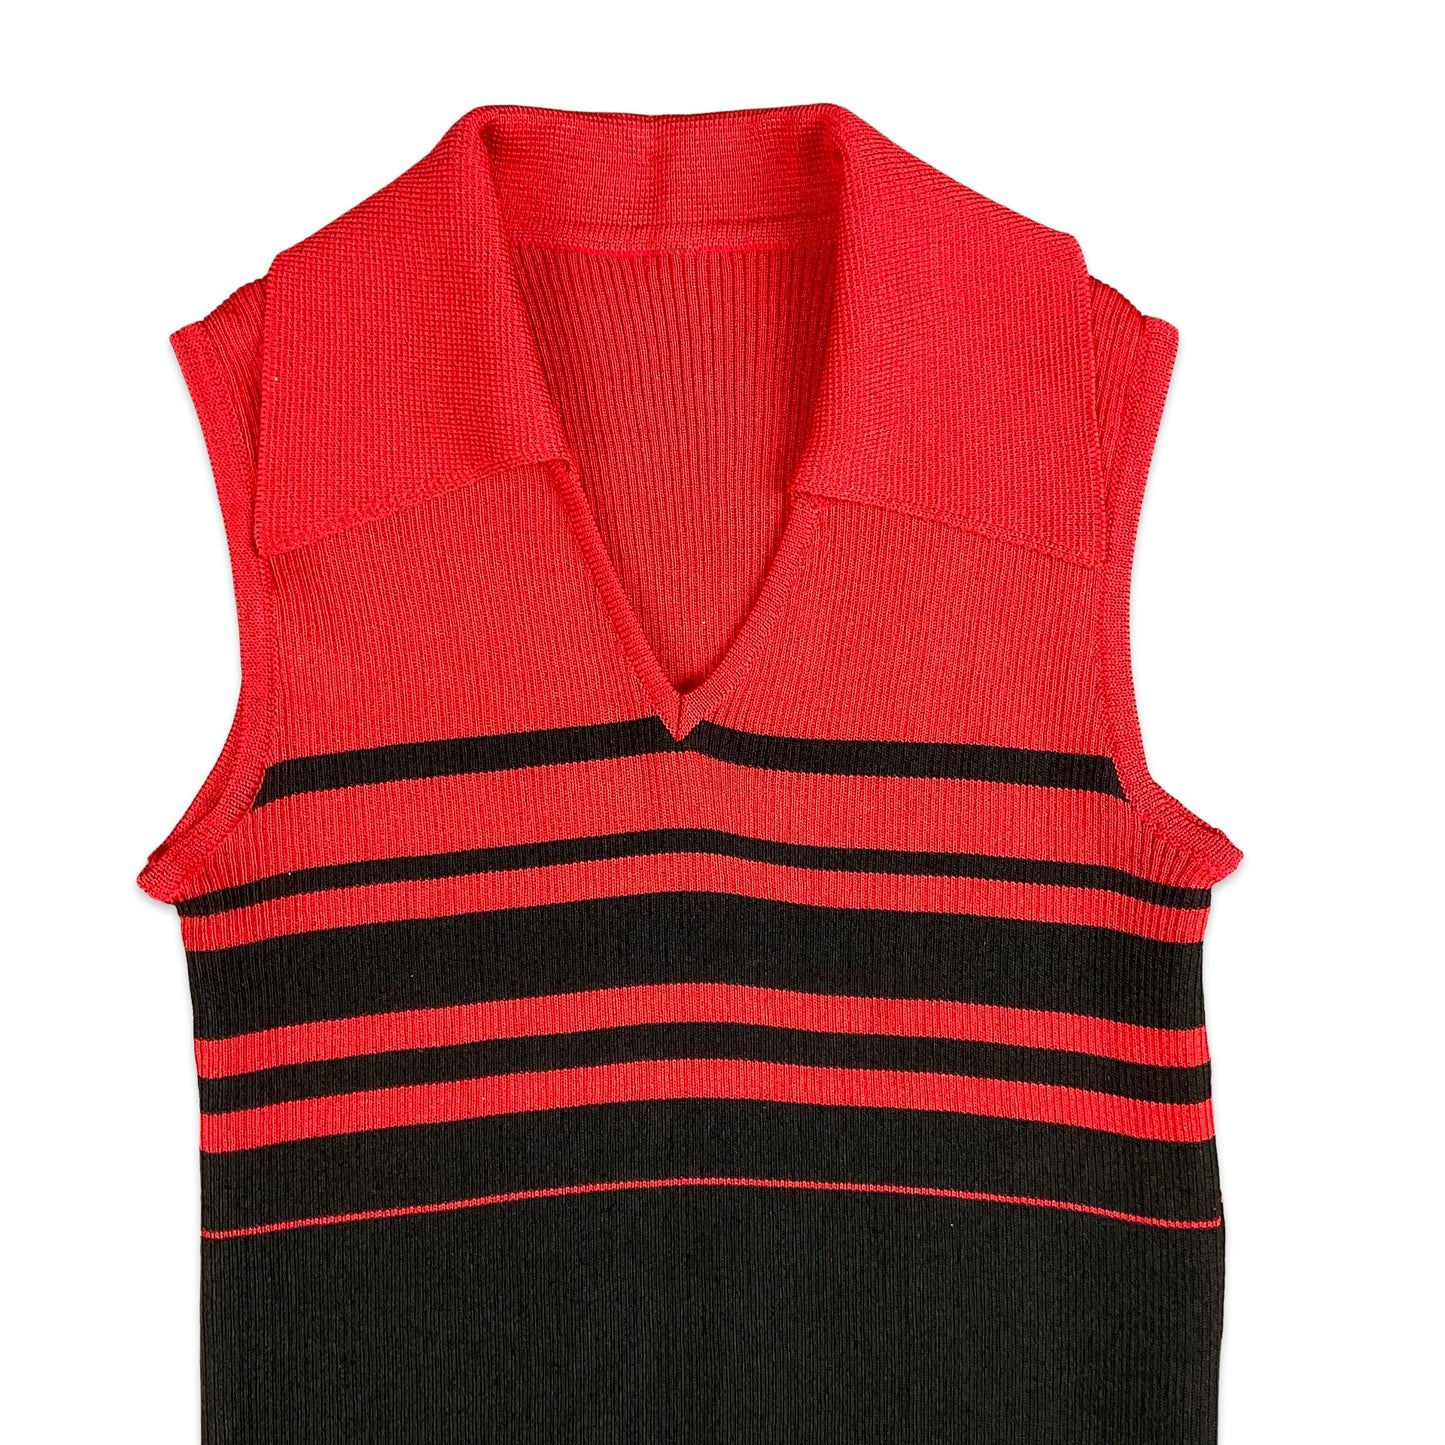 Vintage Red Black Stripe Knitted Sleeveless Top 10 12